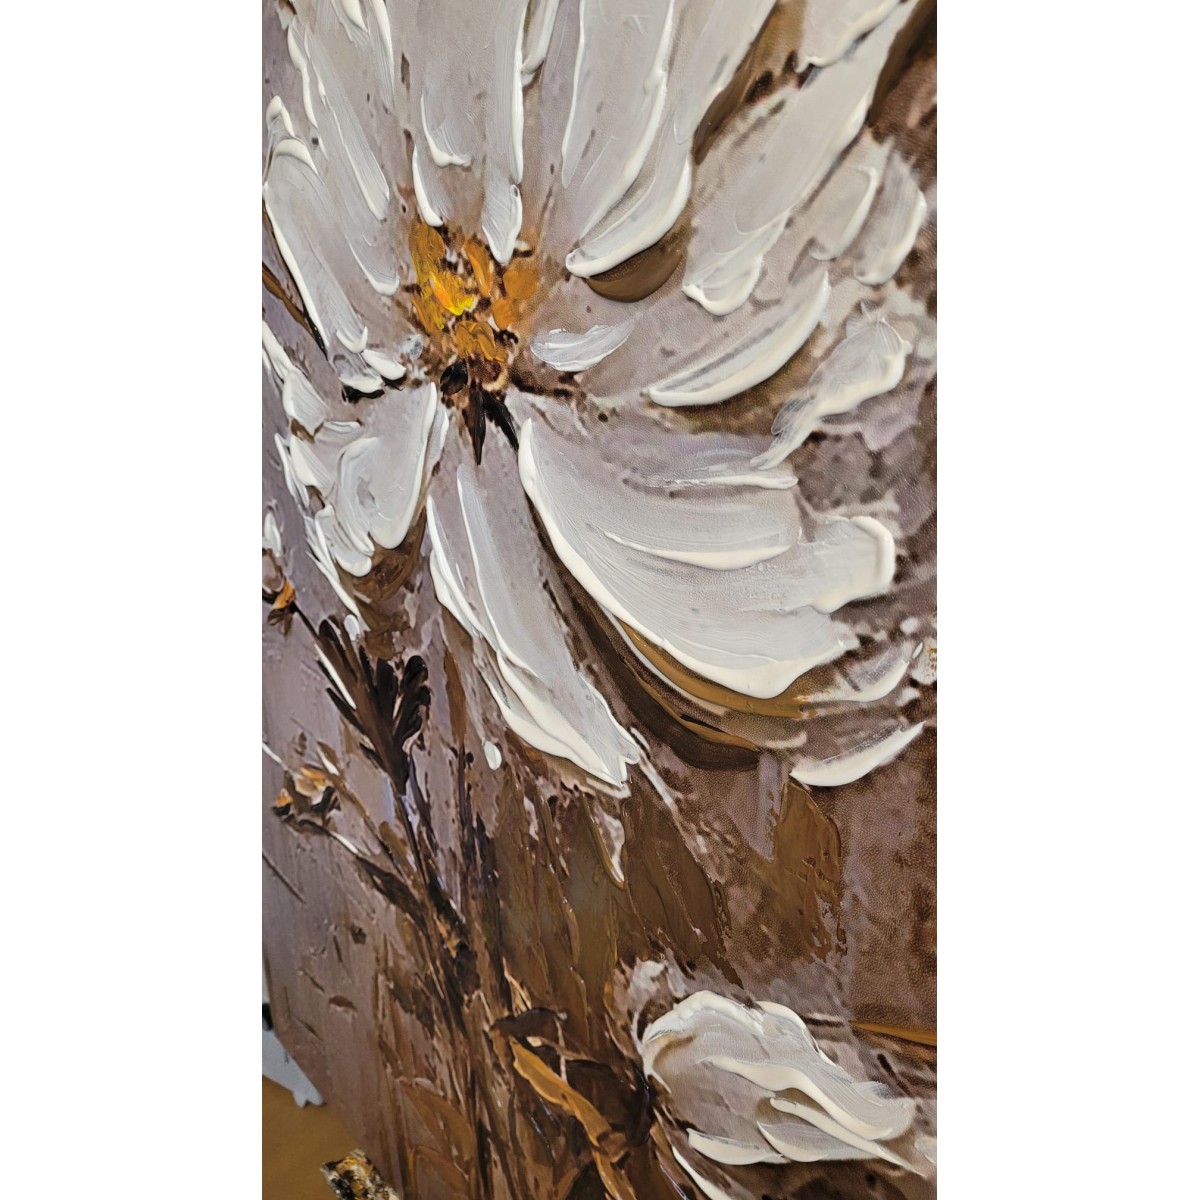 White Flowers with Gold Leaves II 3d Heavy Textured Partial Oil Painting